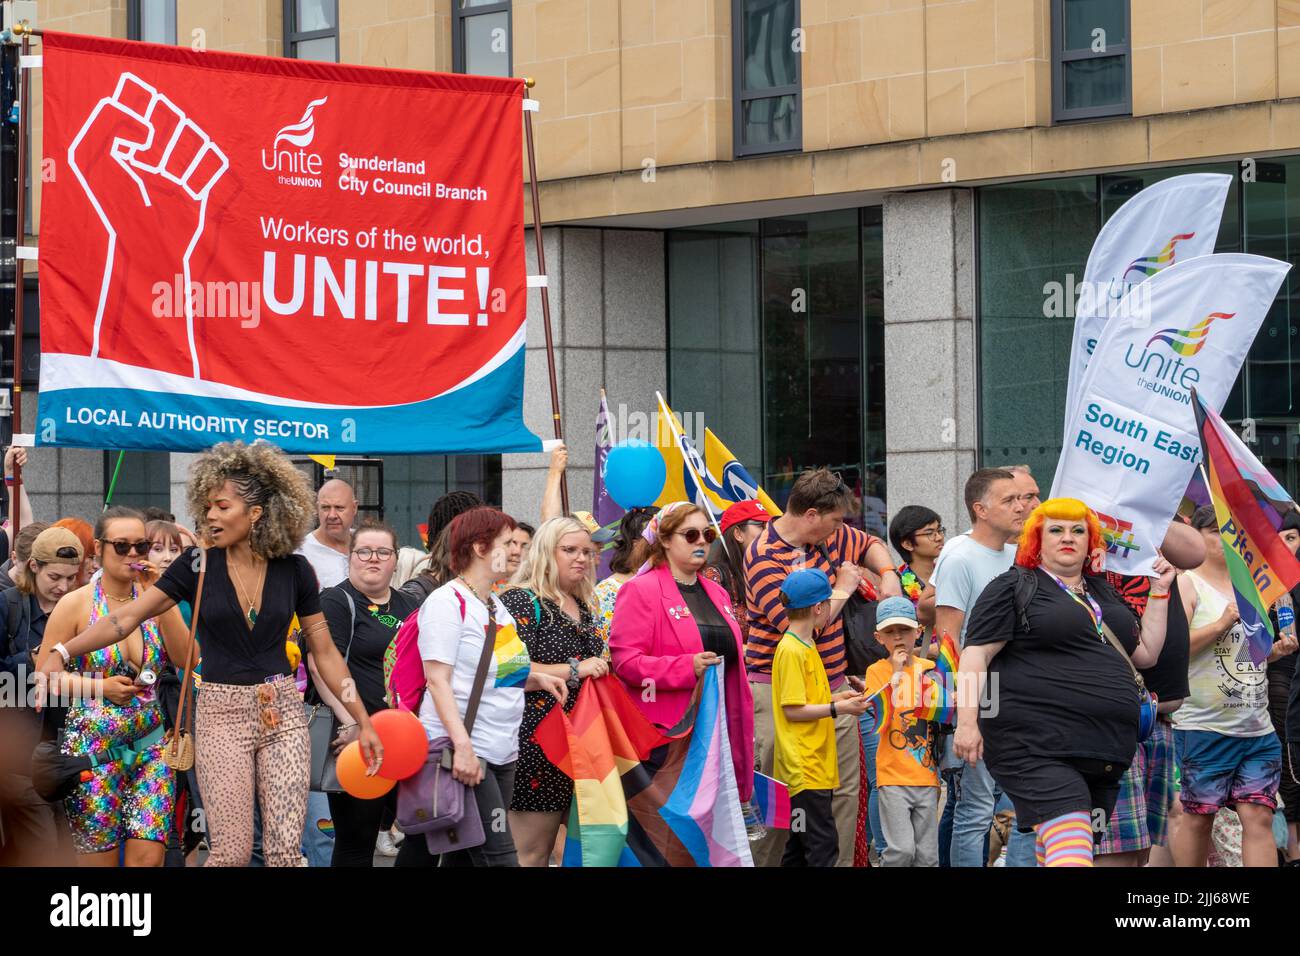 Newcastle upon Tyne, UK. 23rd July 2022. UK Pride 2022. Thousands of LGBTQ+ people and their allies march through the city. The national event, hosted this year by Northern Pride, celebrates diversity and inclusivity.   Credit: Hazel Plater/Alamy Live News Stock Photo